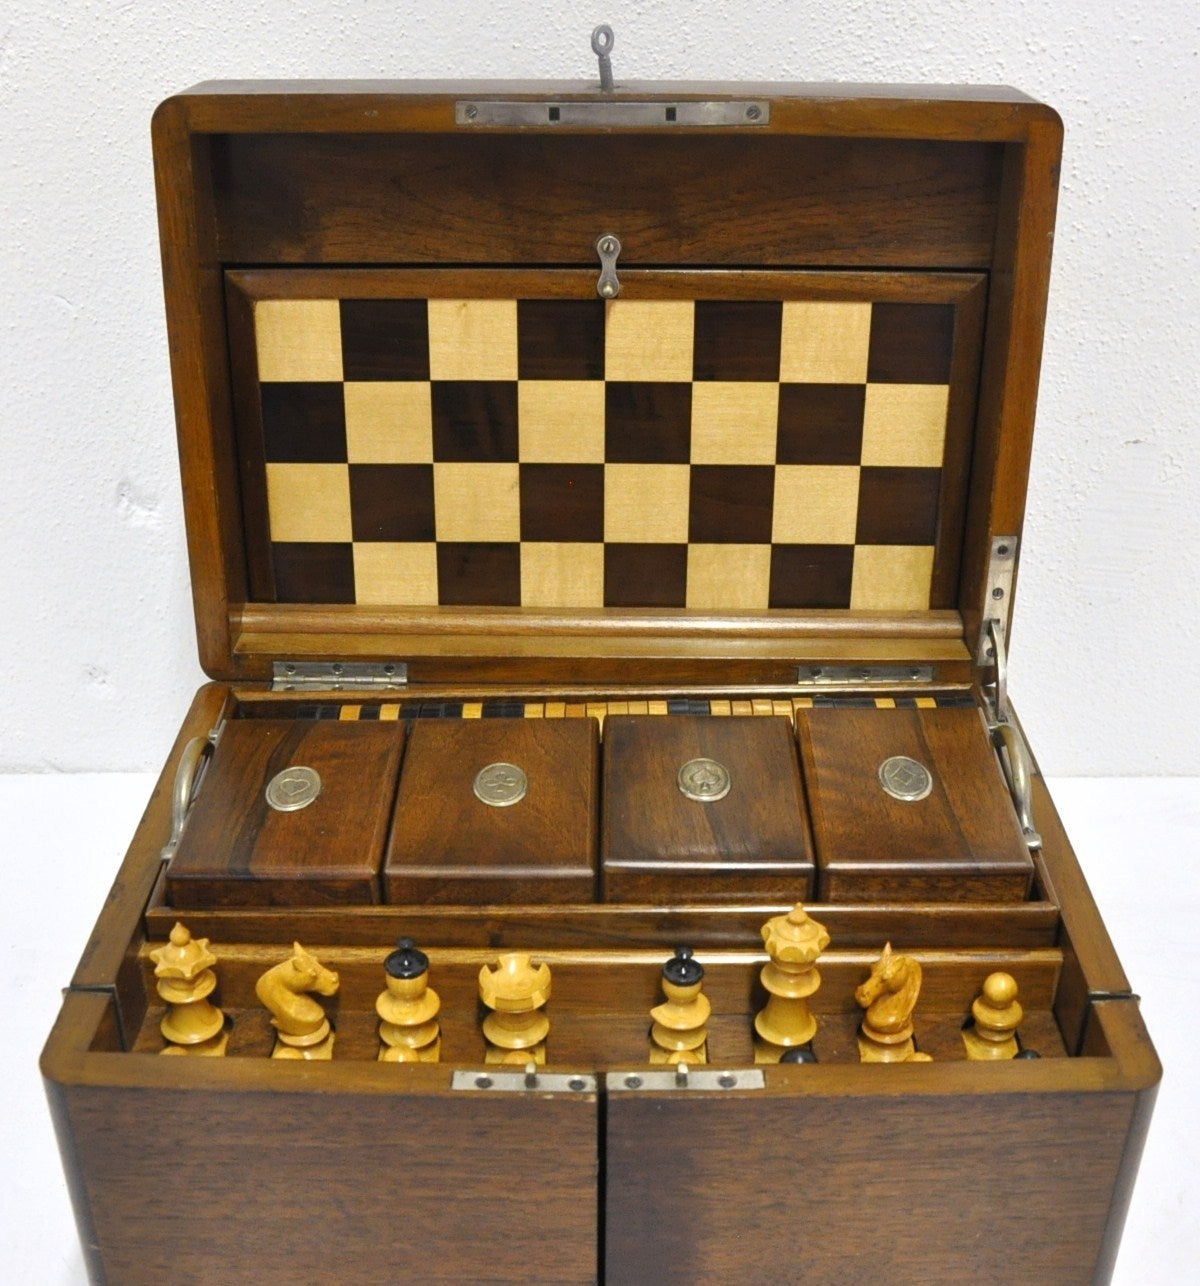 Fabulous 19th century walnut game set box, circa 1880. The hinged top opens to a case fitted for chess, checkers, backgammon, a domino game, numerous poker chips, four wood card holder boxes, two slates black boards with pens...and much more!